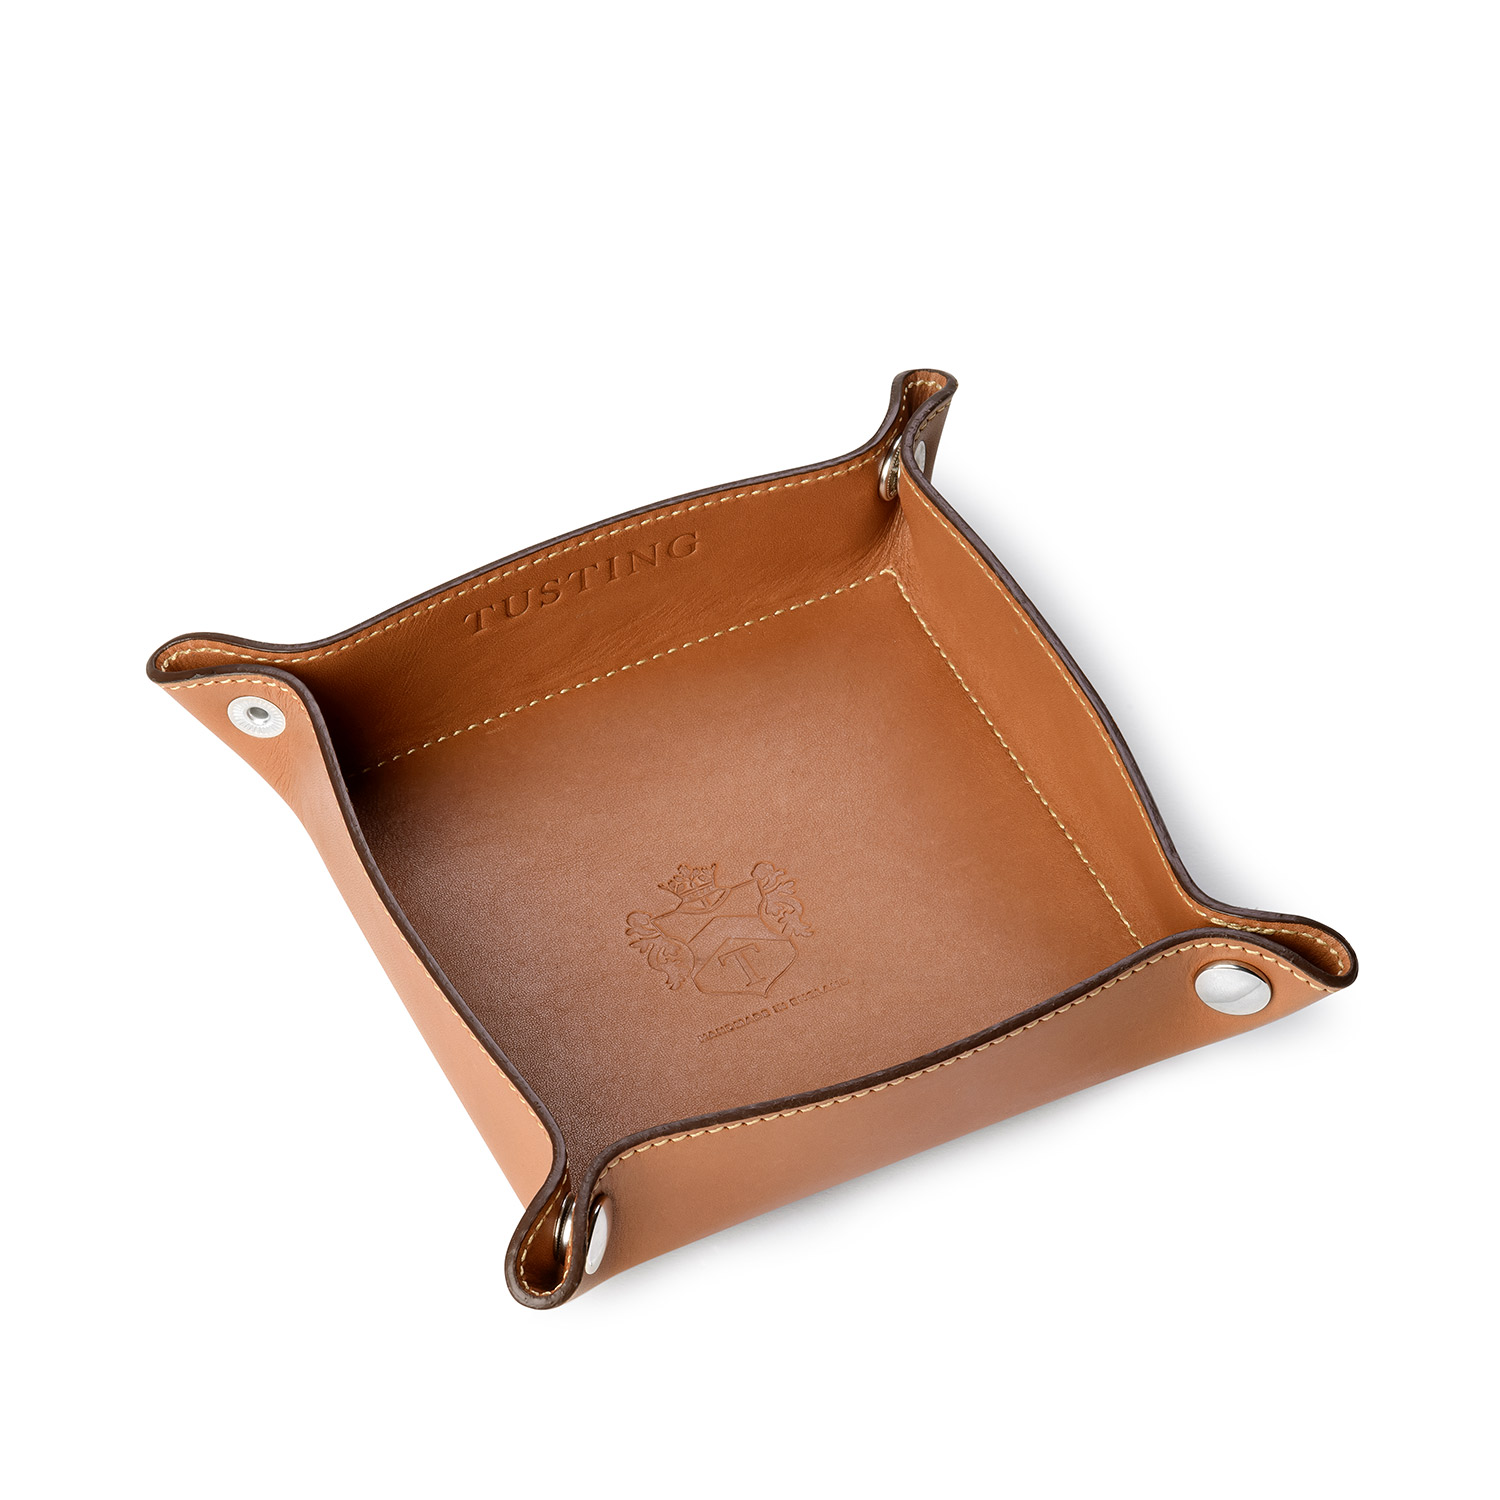 Traditional Leather Valet Tray Made, Brown Leather Valet Tray